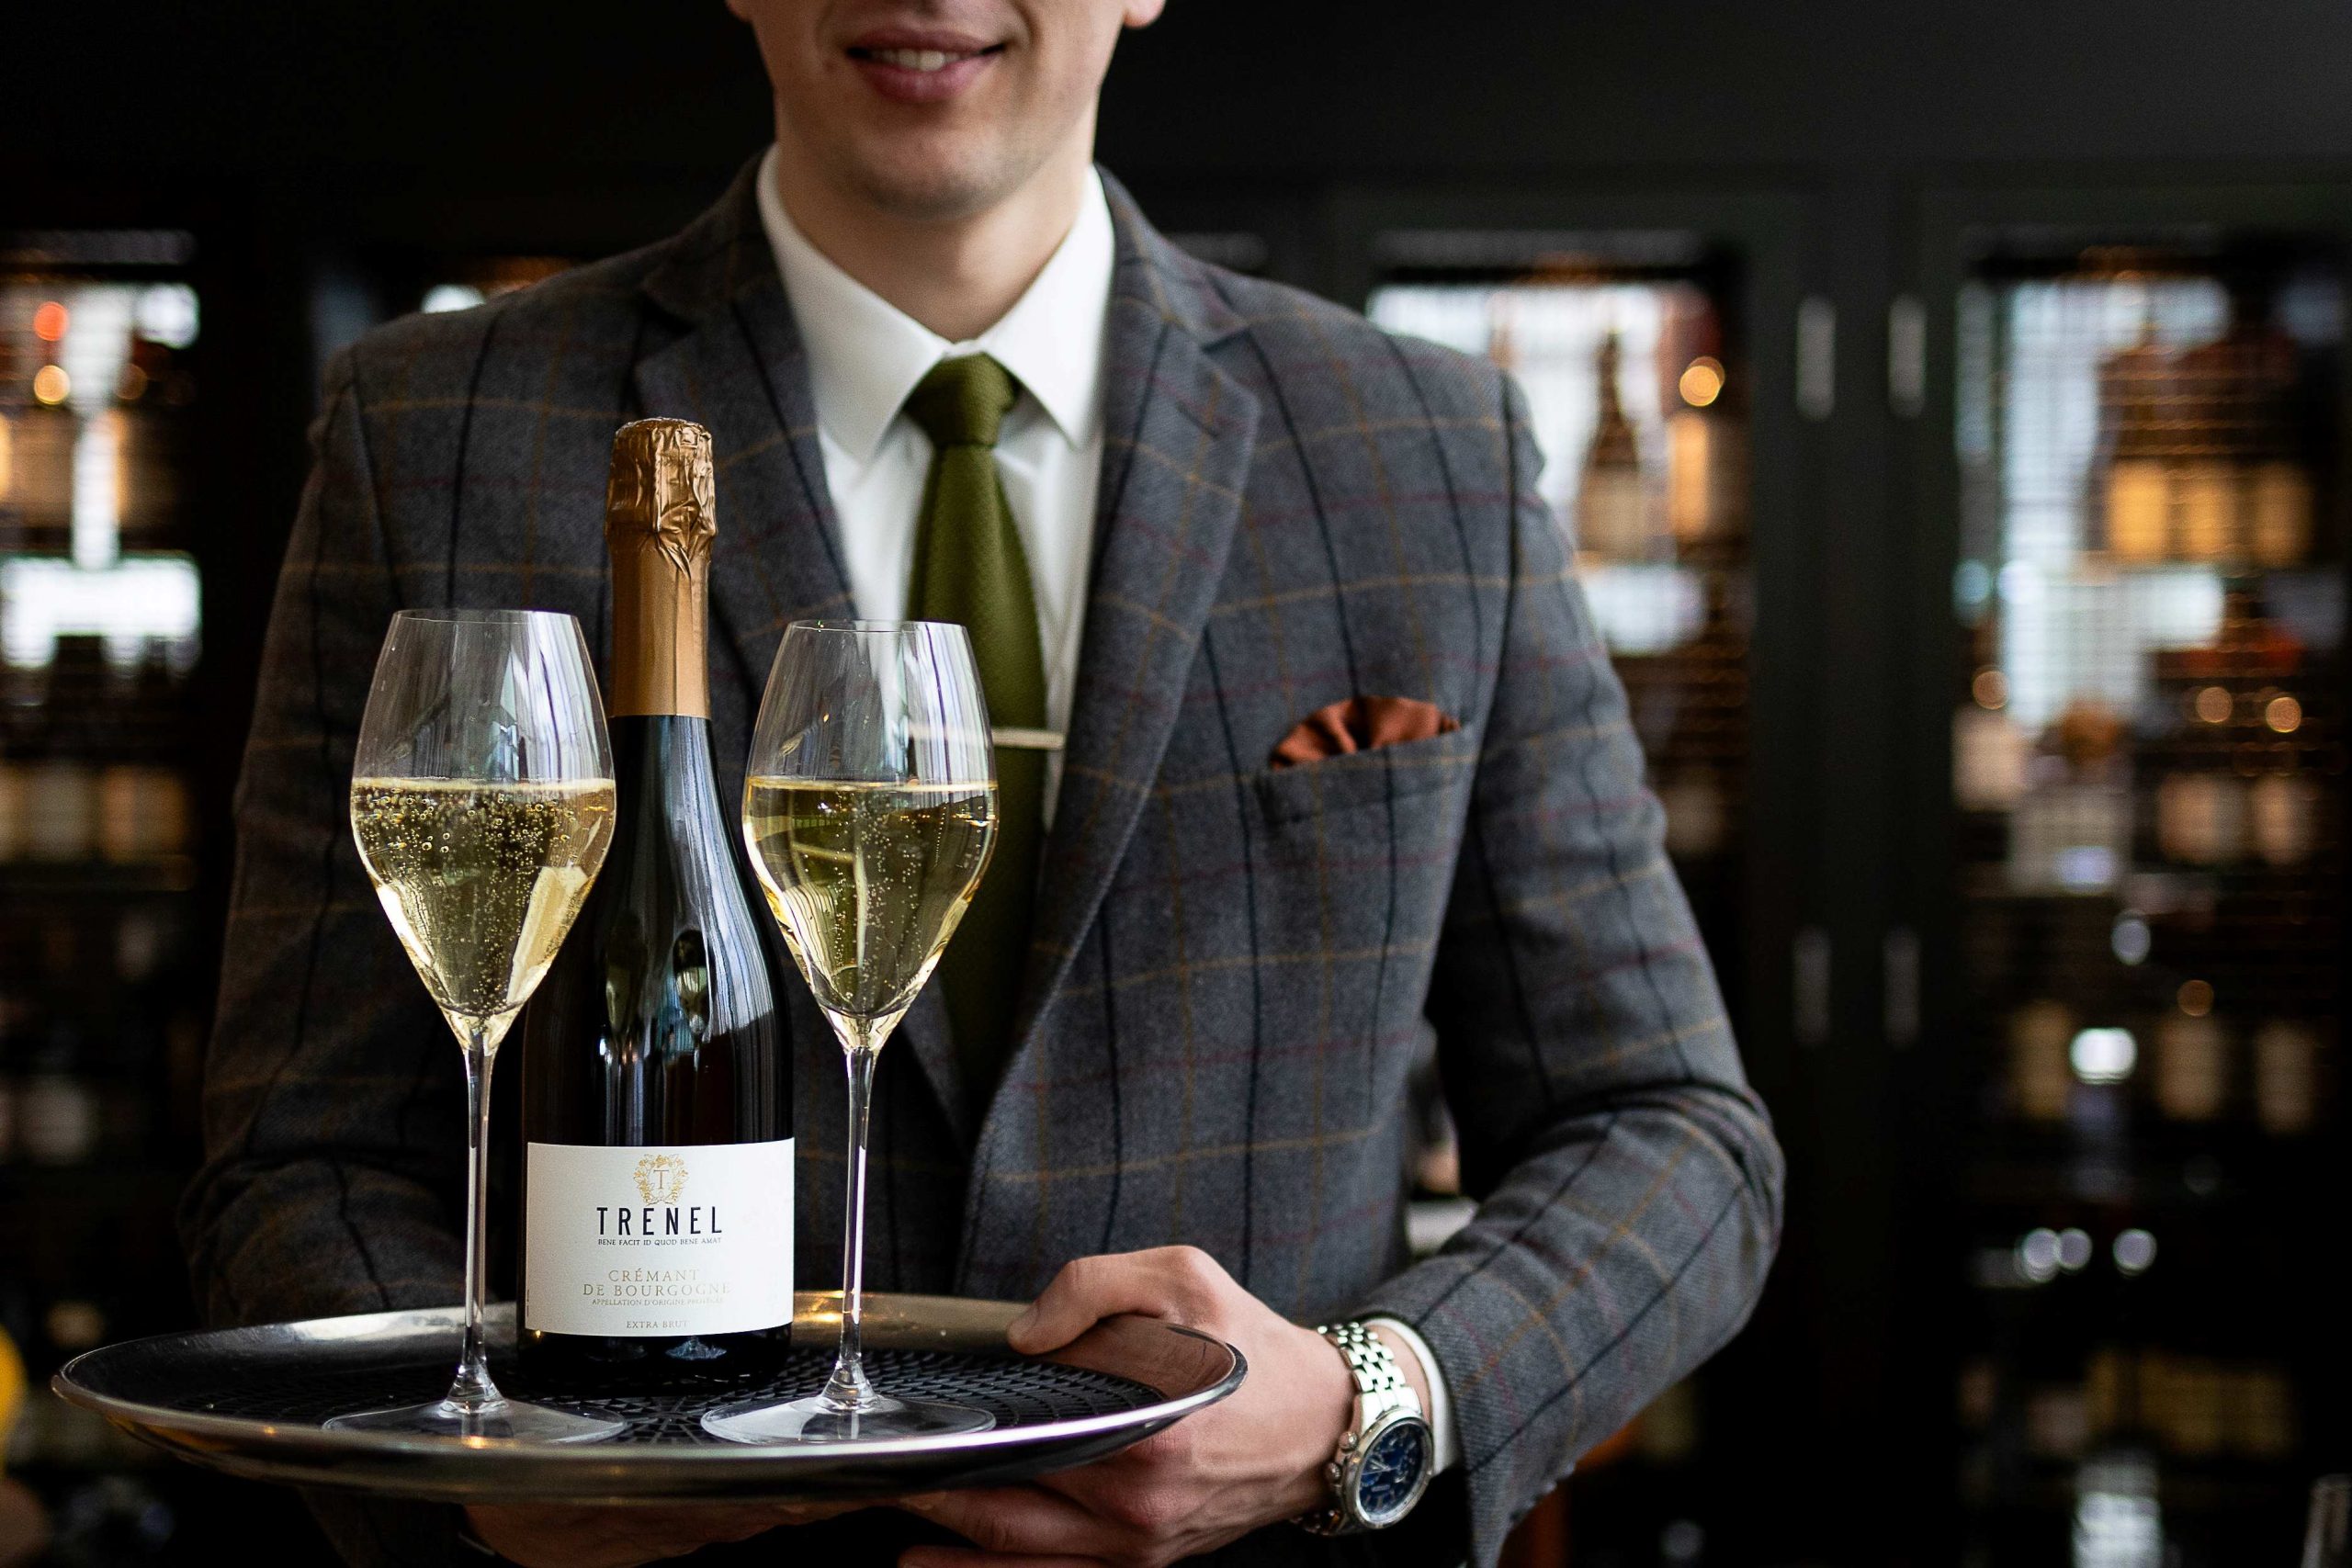 CELEBRATE THE MAGIC OF AYALA CHAMPAGNE AT FORBES STREET BY GARETH MULLINS